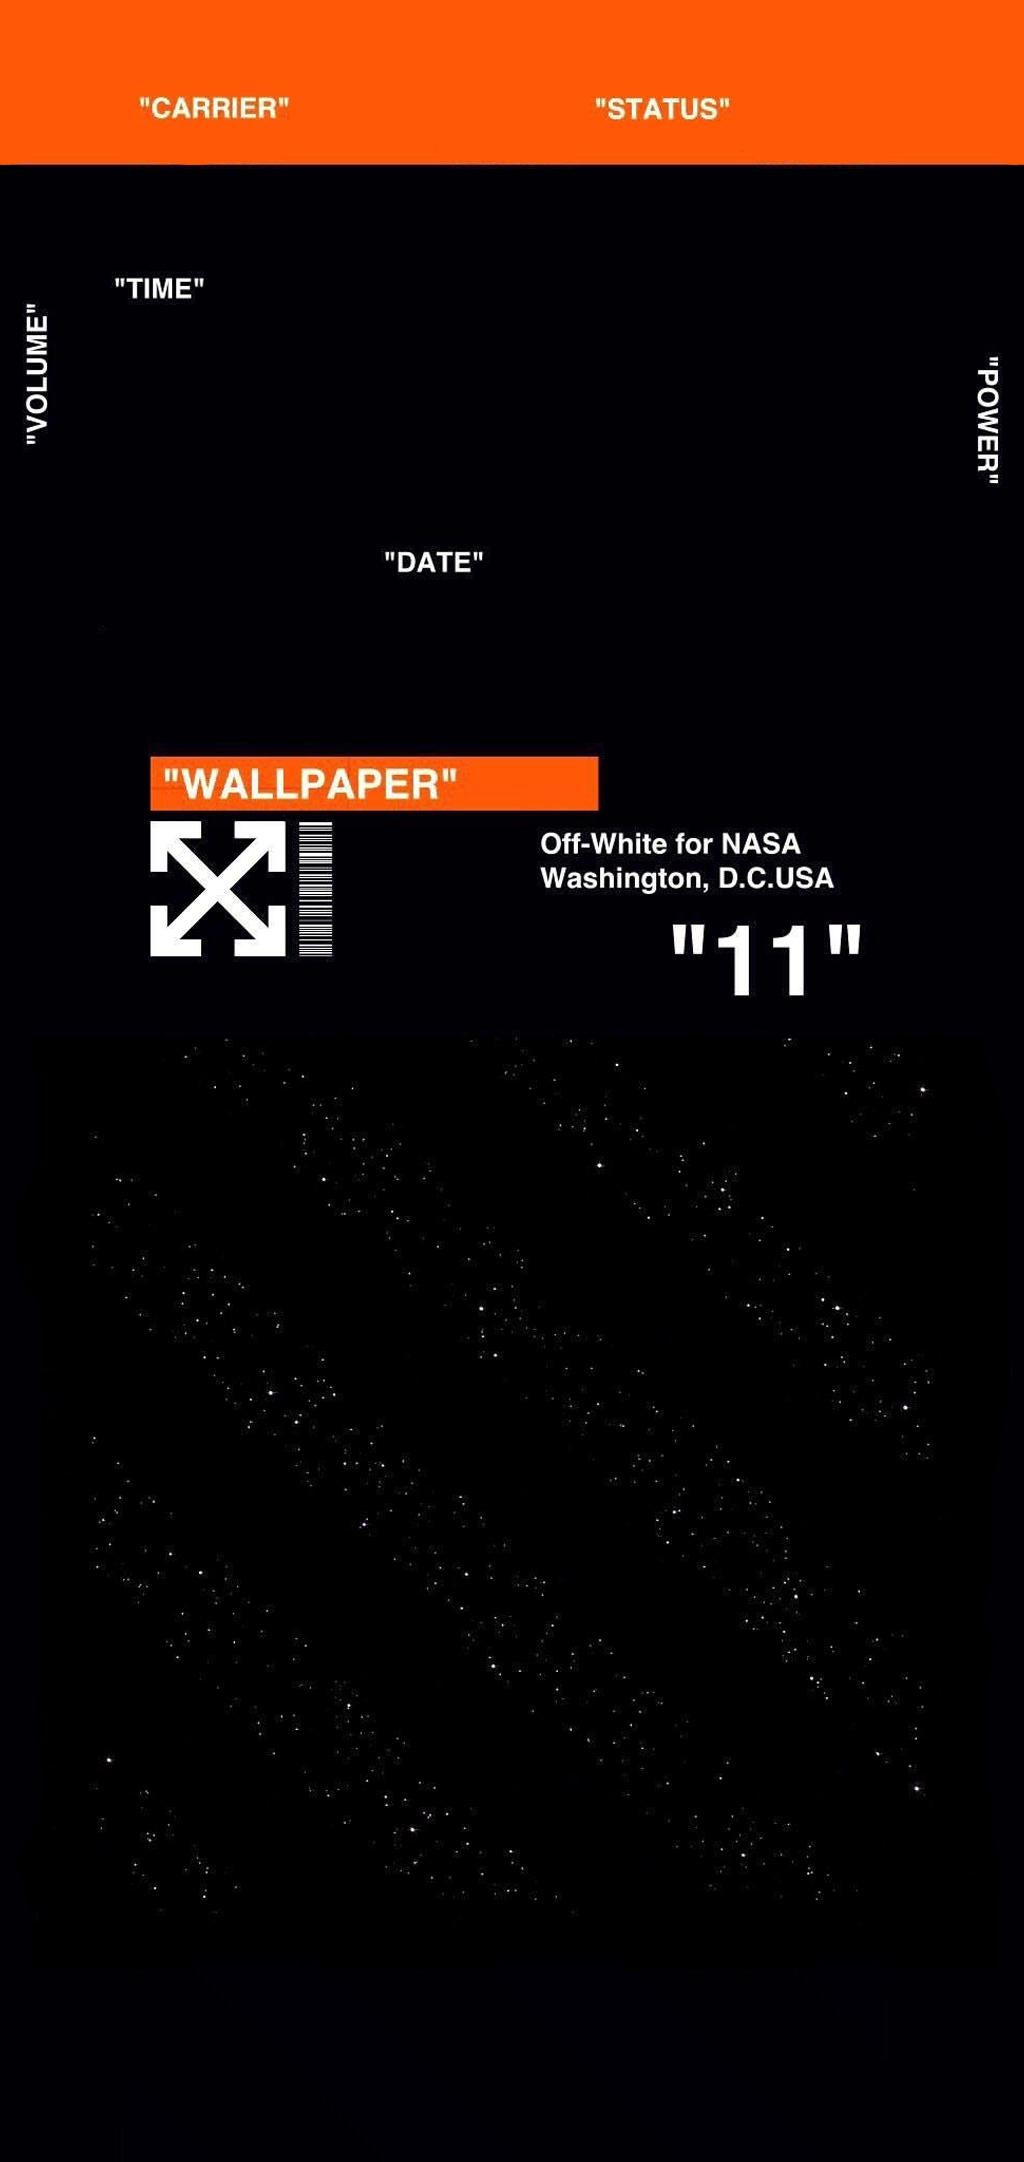 Off White Wallpapers